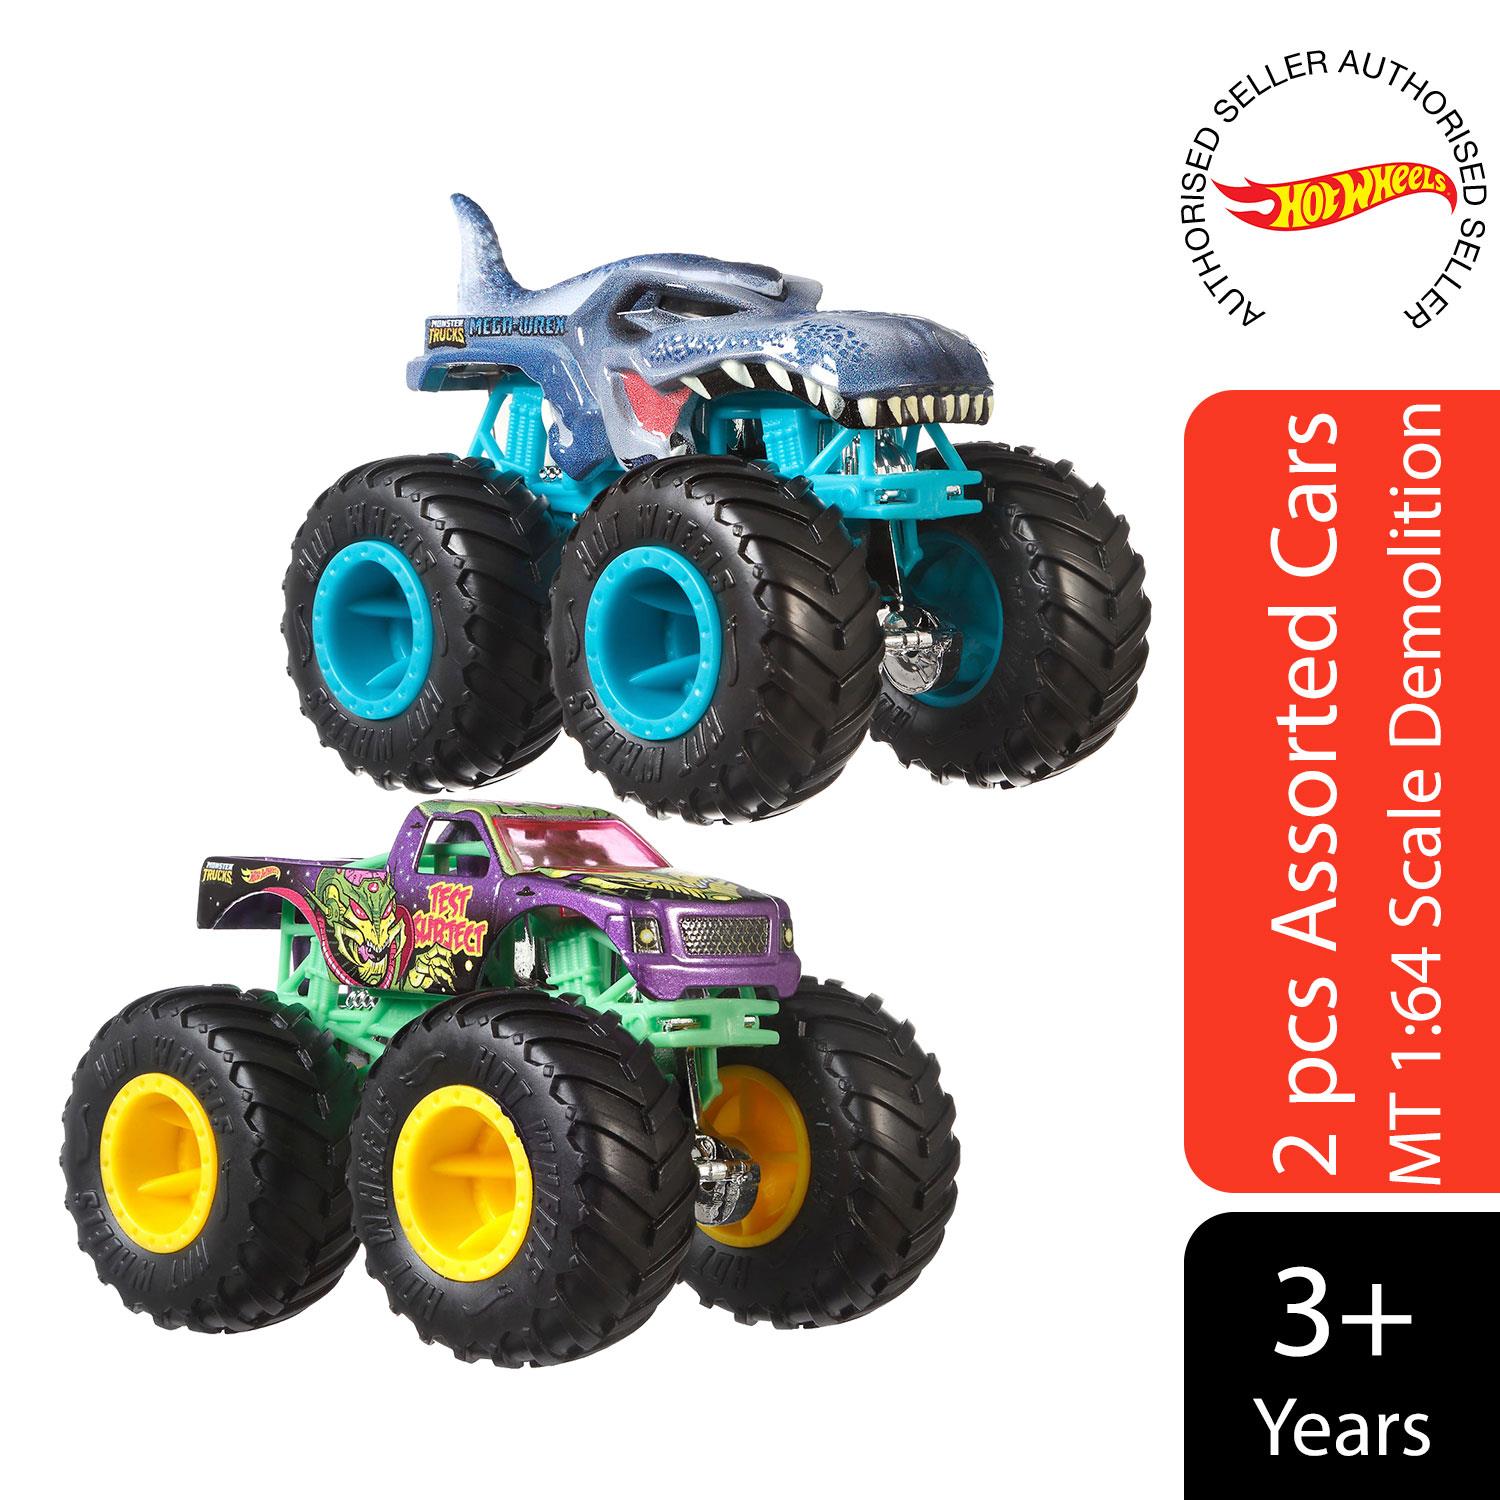 Hot Wheels Monster Truck Pit & Launch Playsets with a 1 Monster Truck & 1  Hot Wheels 1:64 Scale Car, Great Gift for Kids Ages 4 Years & Older